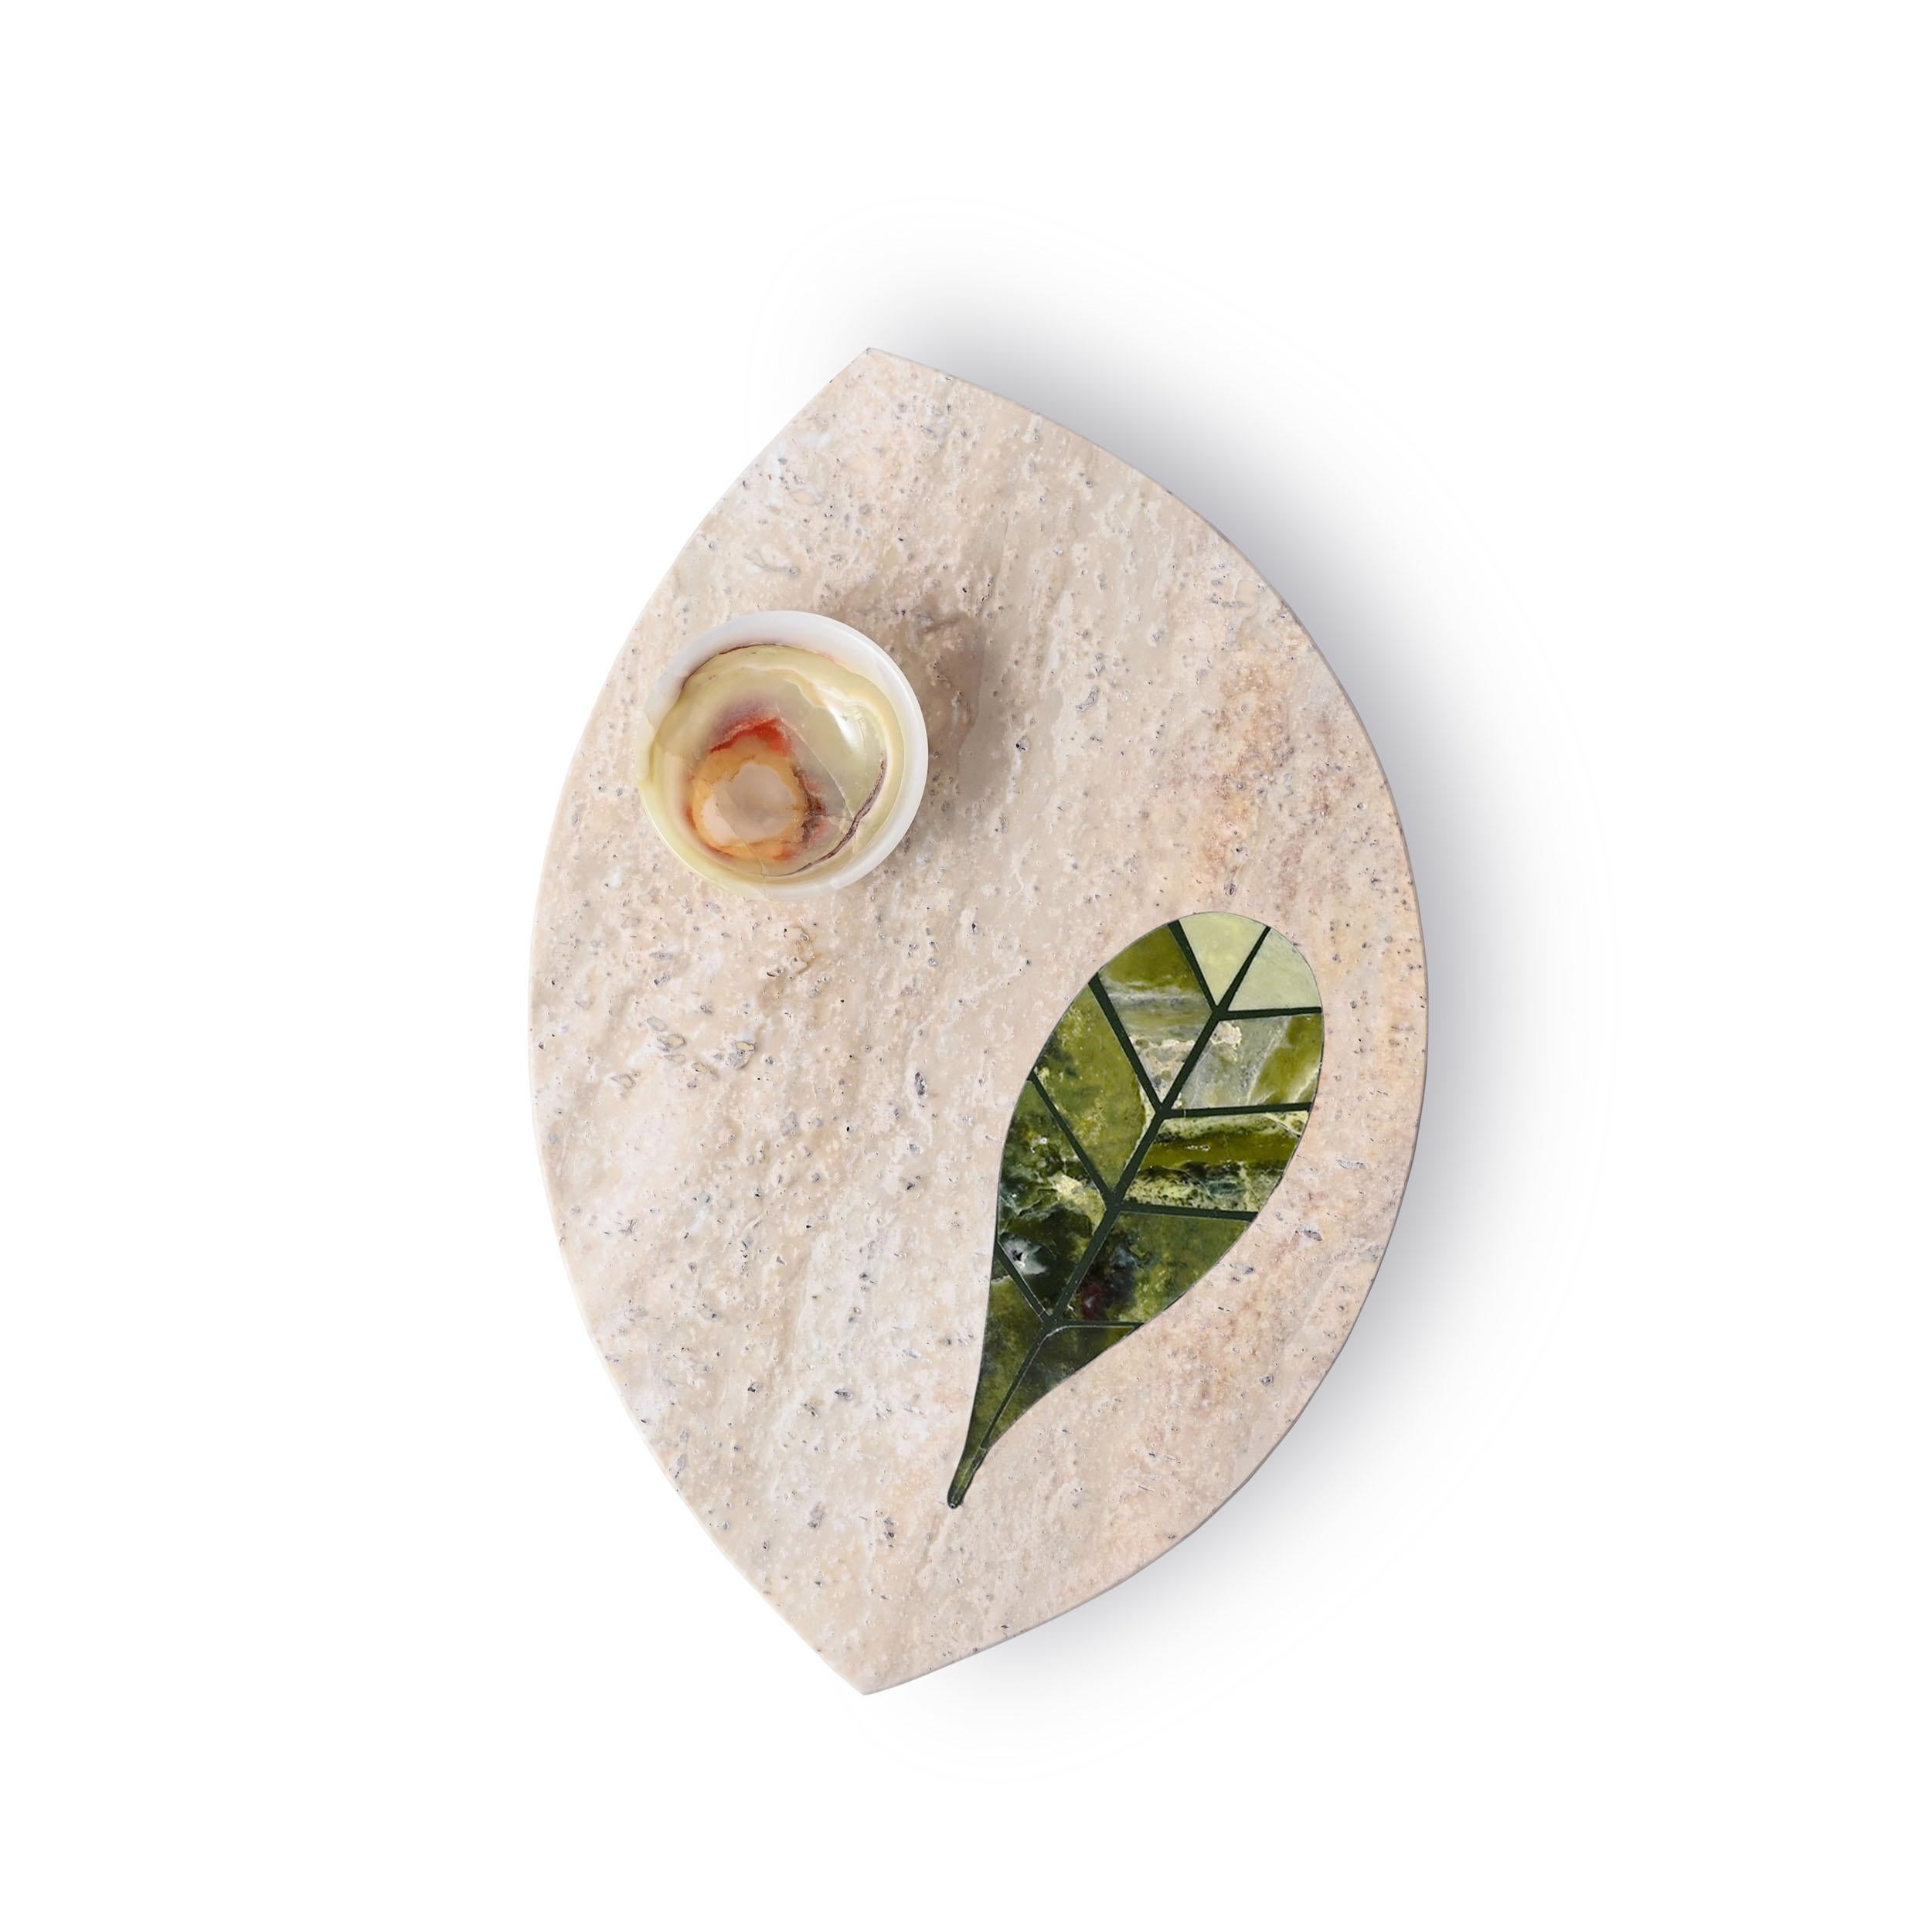 Lush platter I by Studio Lel
Dimensions: D35.6 x H22.8 x H2.5 cm
Materials: Serpentine, Marble

These are handmade from semiprecious stone and marble in a small artisanal workshop. Please note that variations and slight imperfections are part of